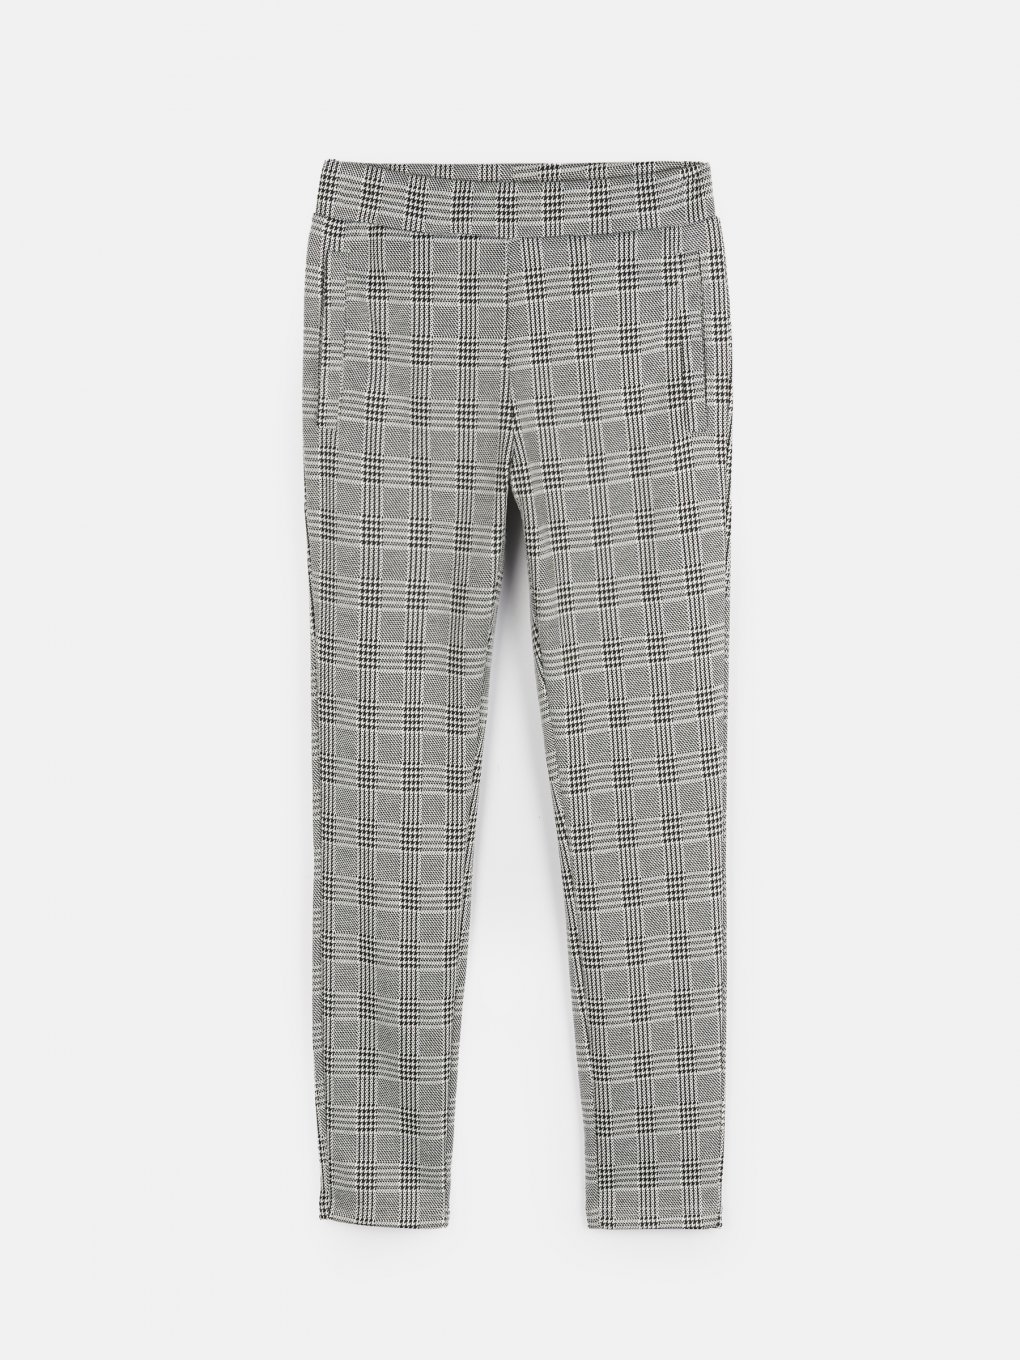 Plaid slim trousers with pockets